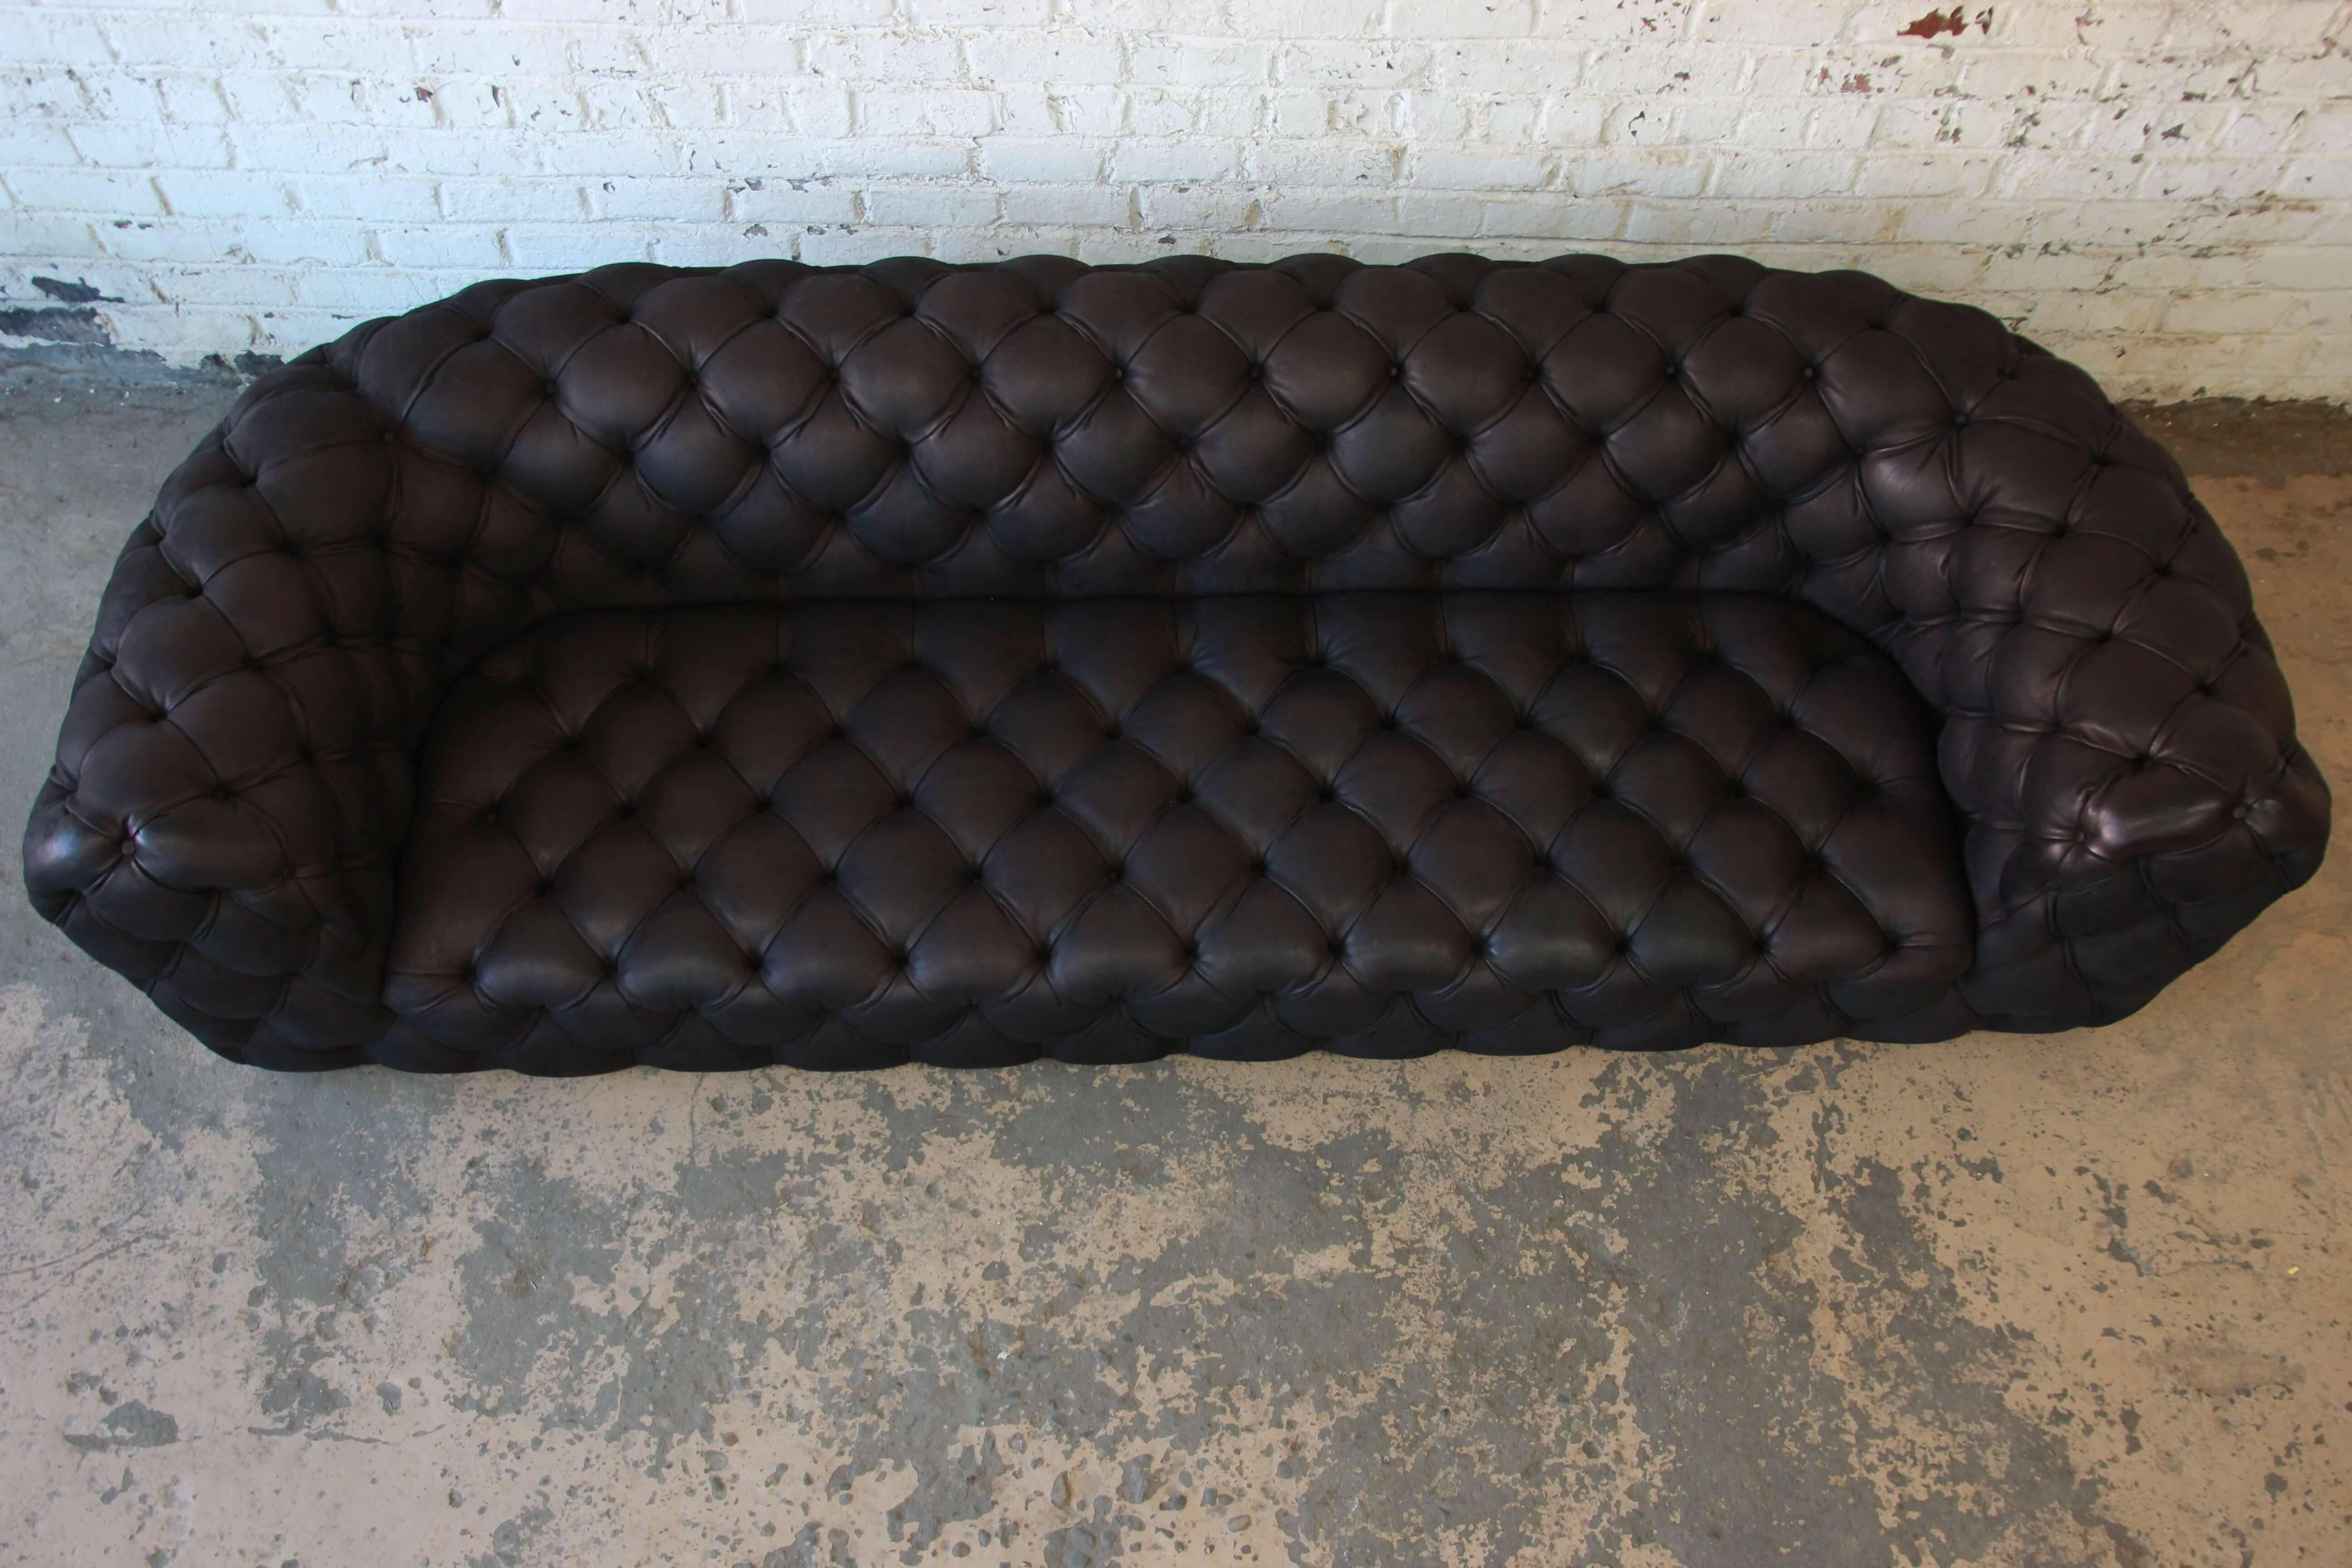 Mid-Century Modern Italian Tufted Black Leather Chester Moon Sofa by Paola Navone for Baxter